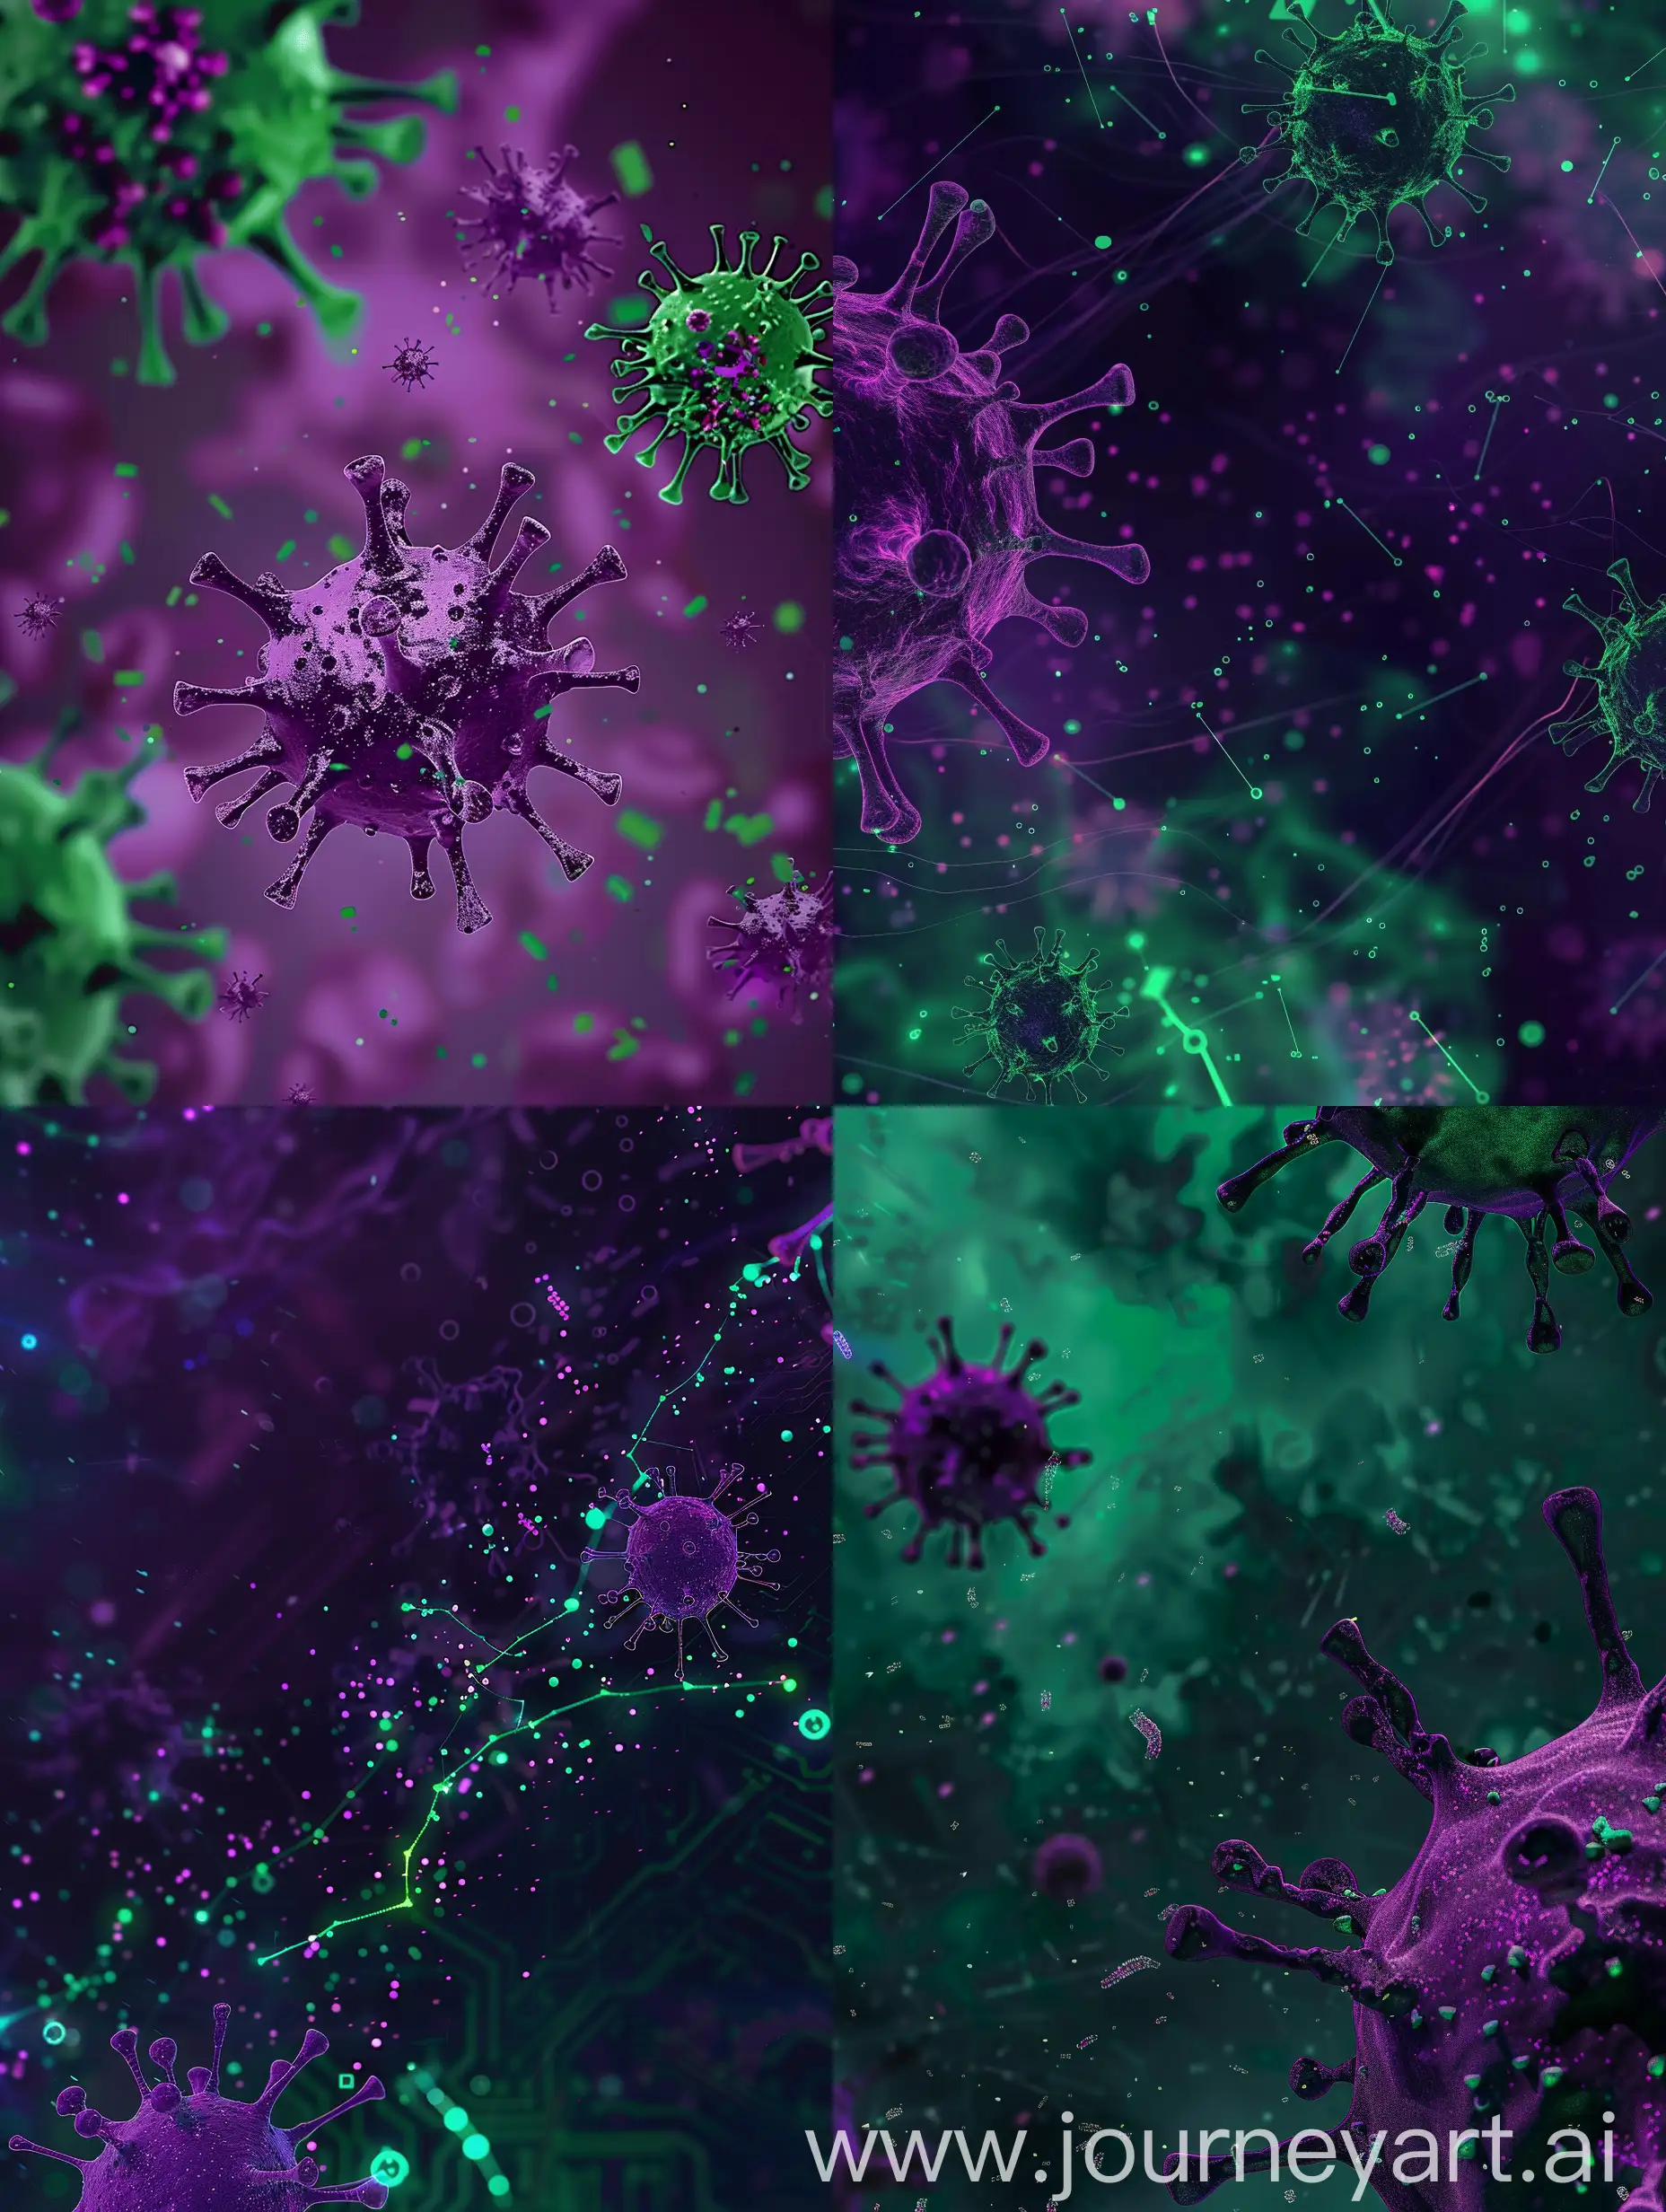 Abstract-Pale-Purple-and-Green-AntiVirus-Framework-with-Sprinkled-Art-and-Small-Components